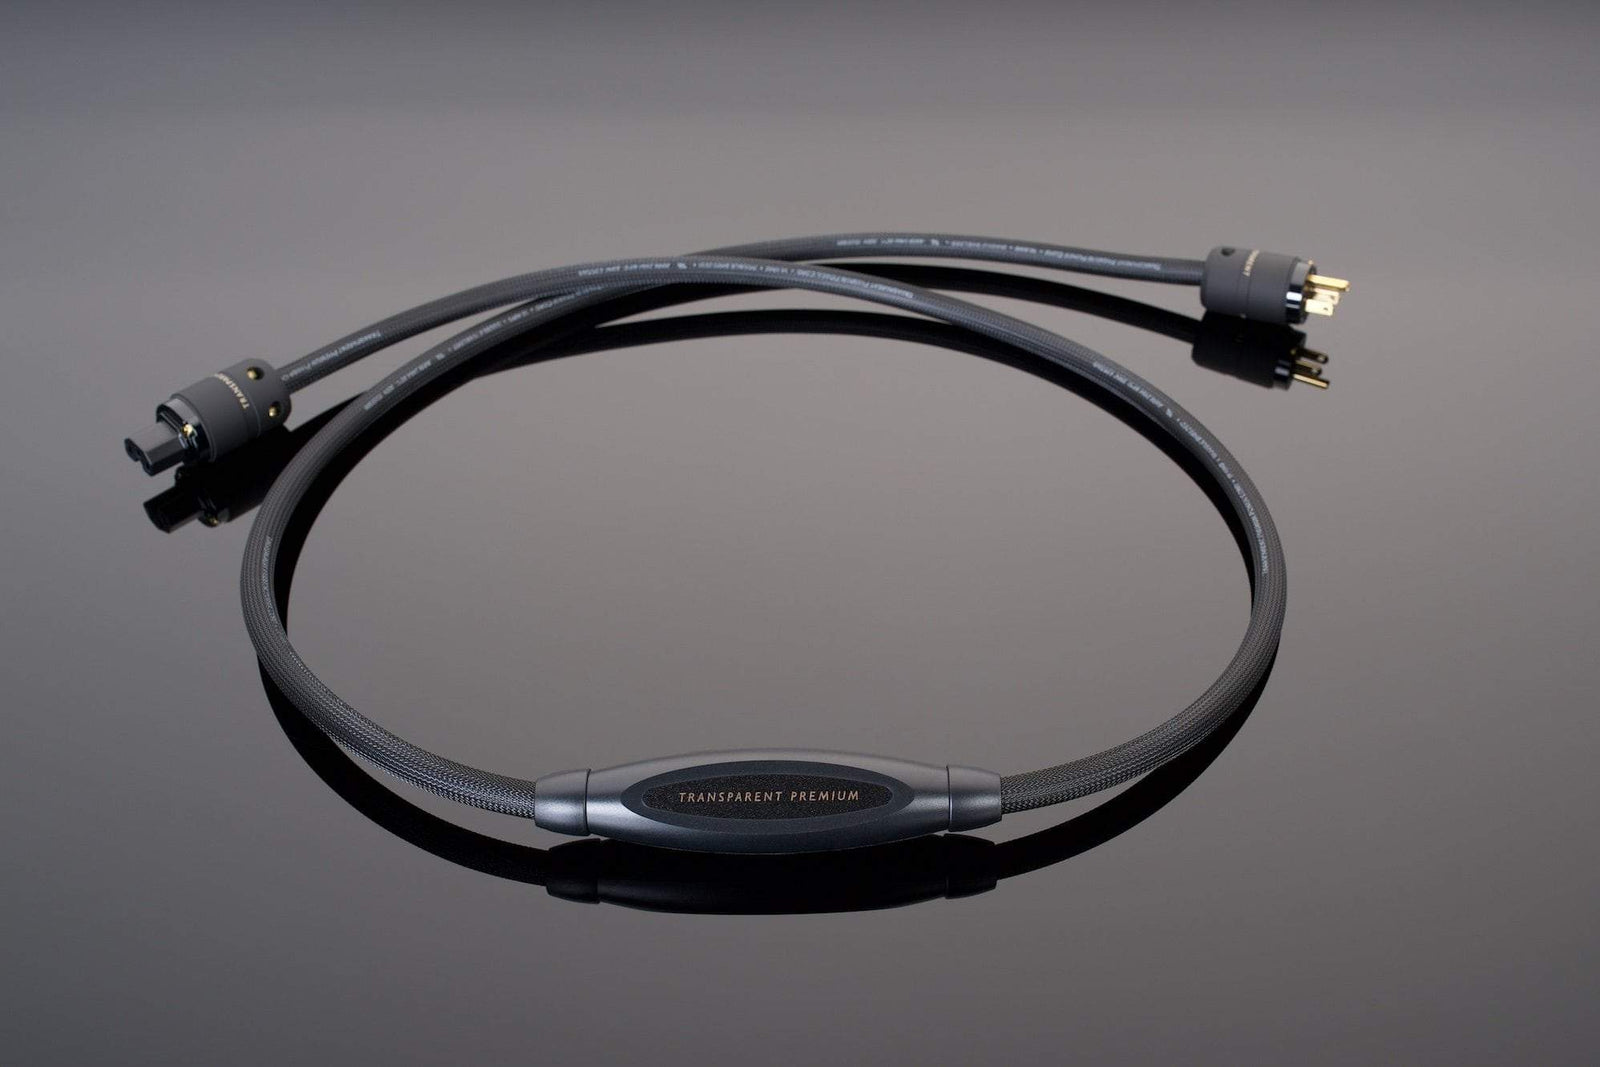 Premiumcord TV antenna connection cable 15m (coaxial, M / F, 75 Ohm) -  merXu - Negotiate prices! Wholesale purchases!